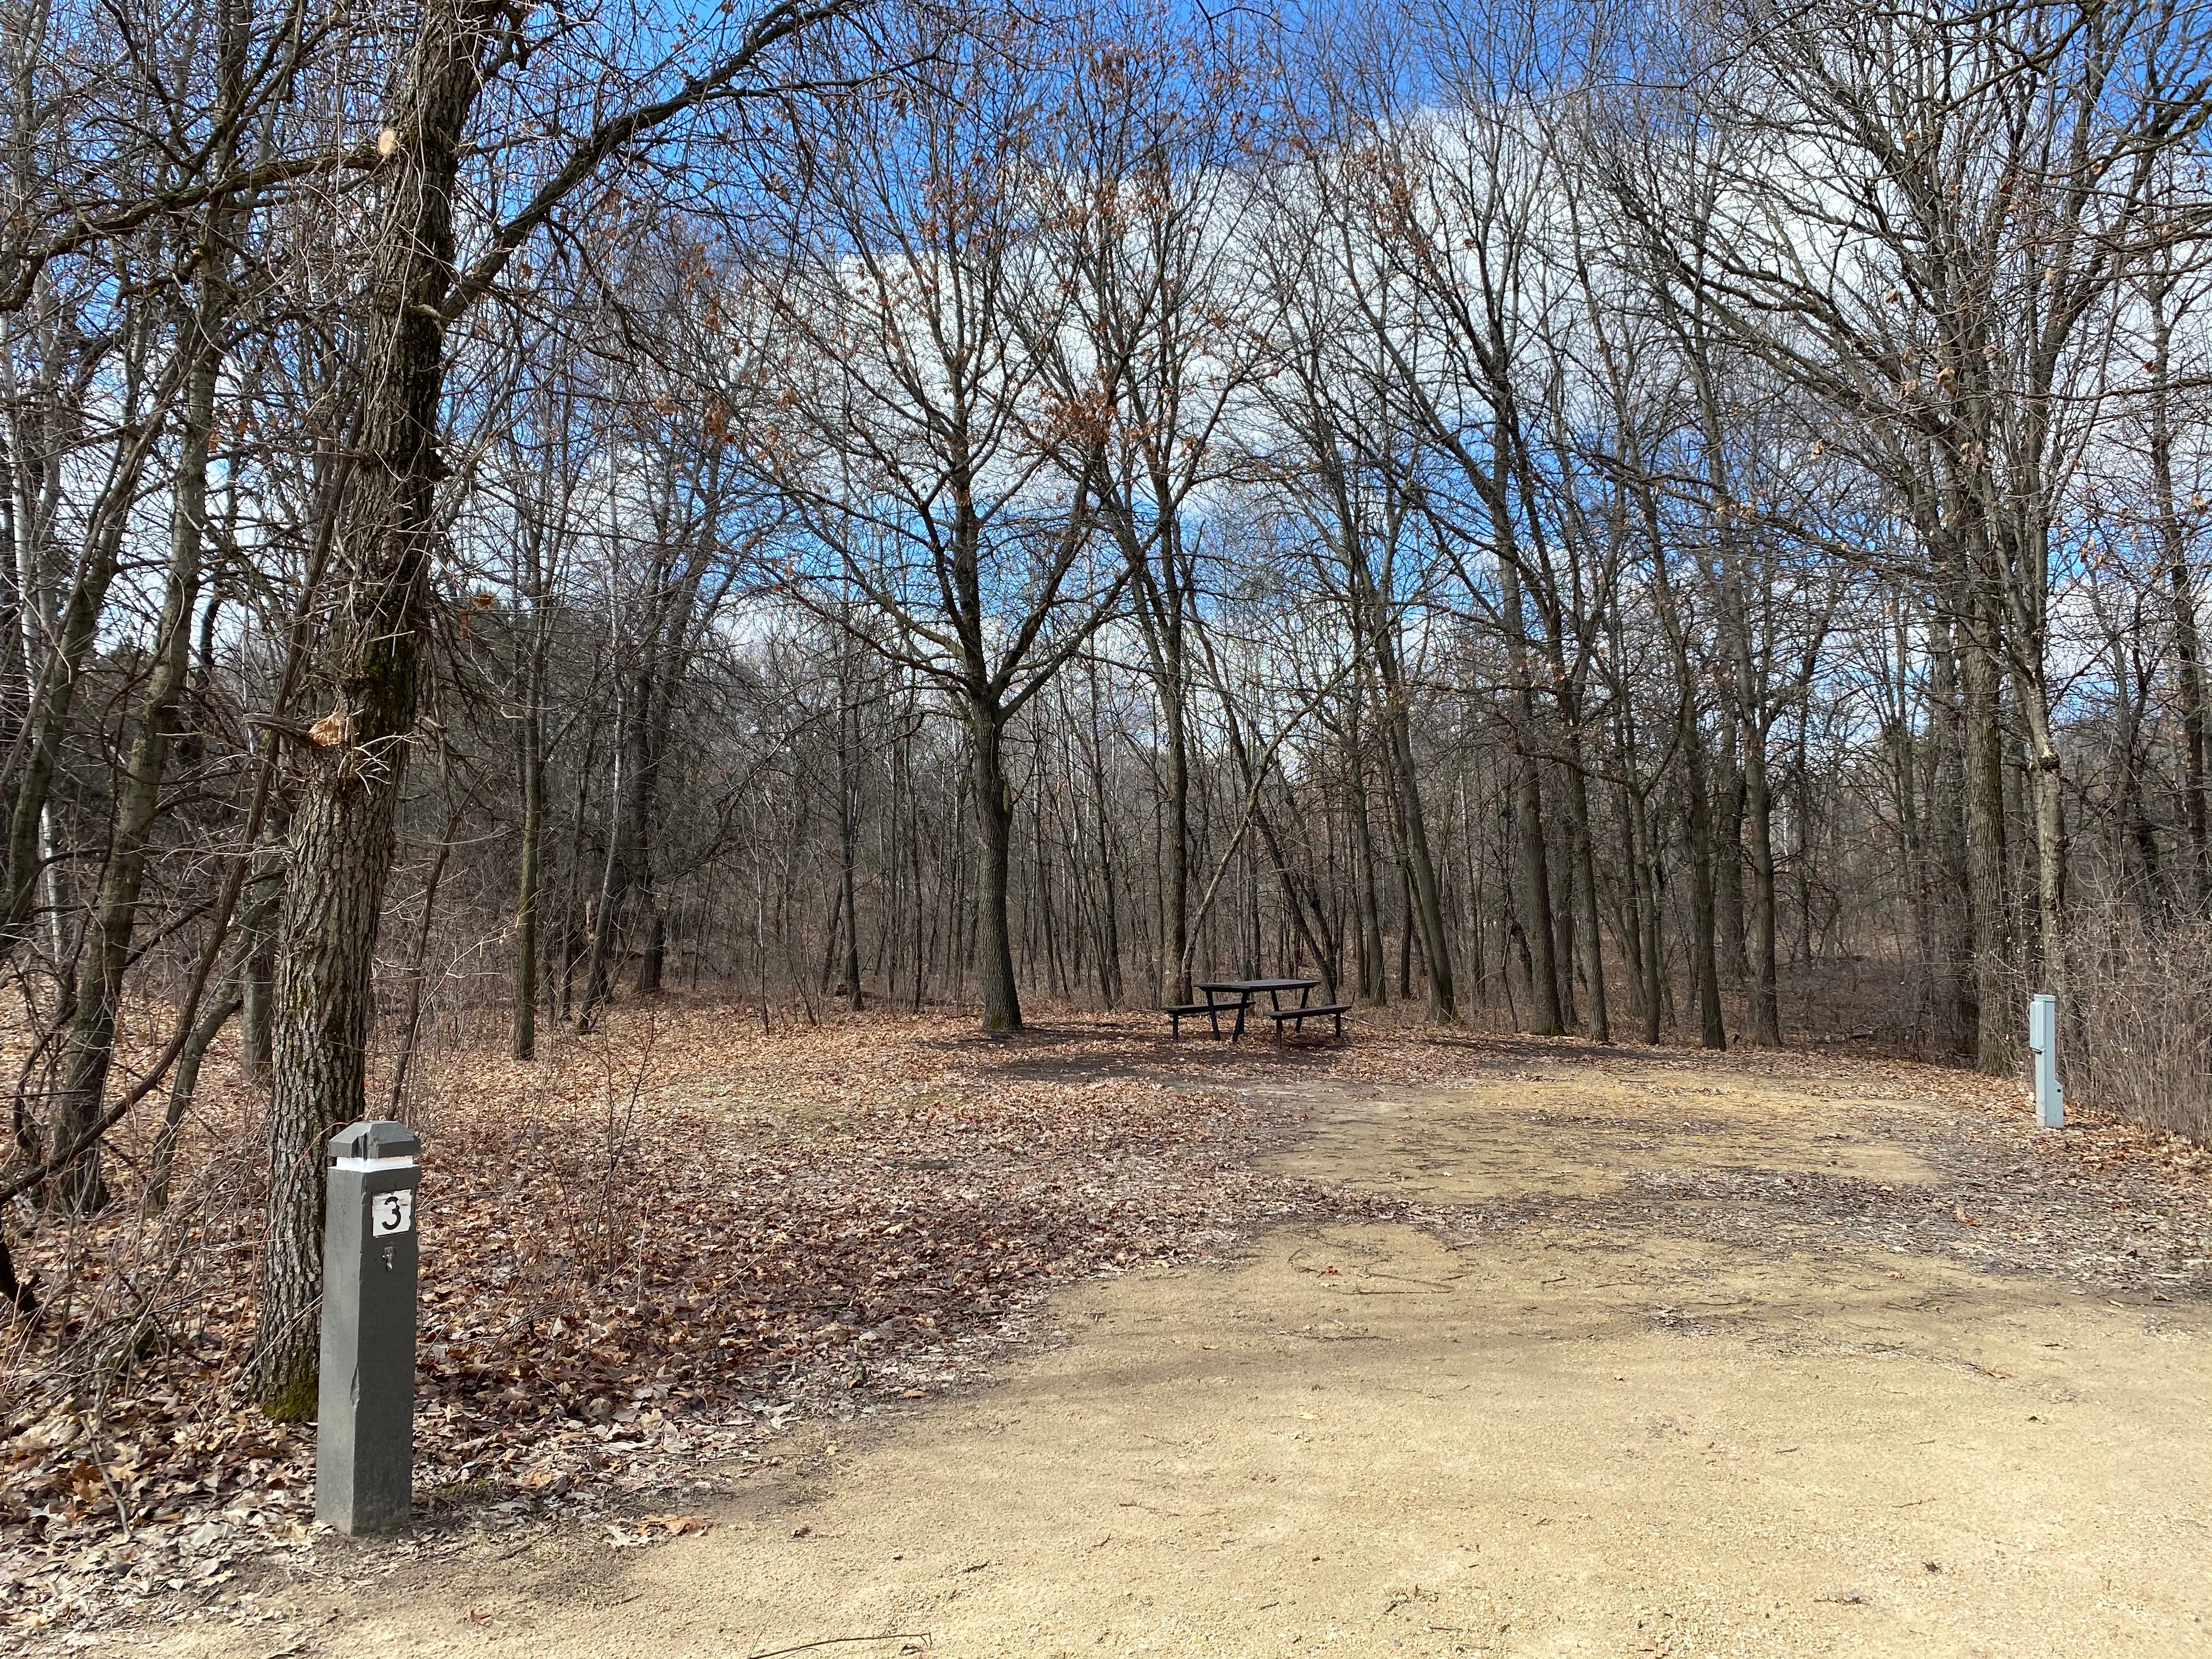 Camper submitted image from Bunker Hills Regional Park - 1